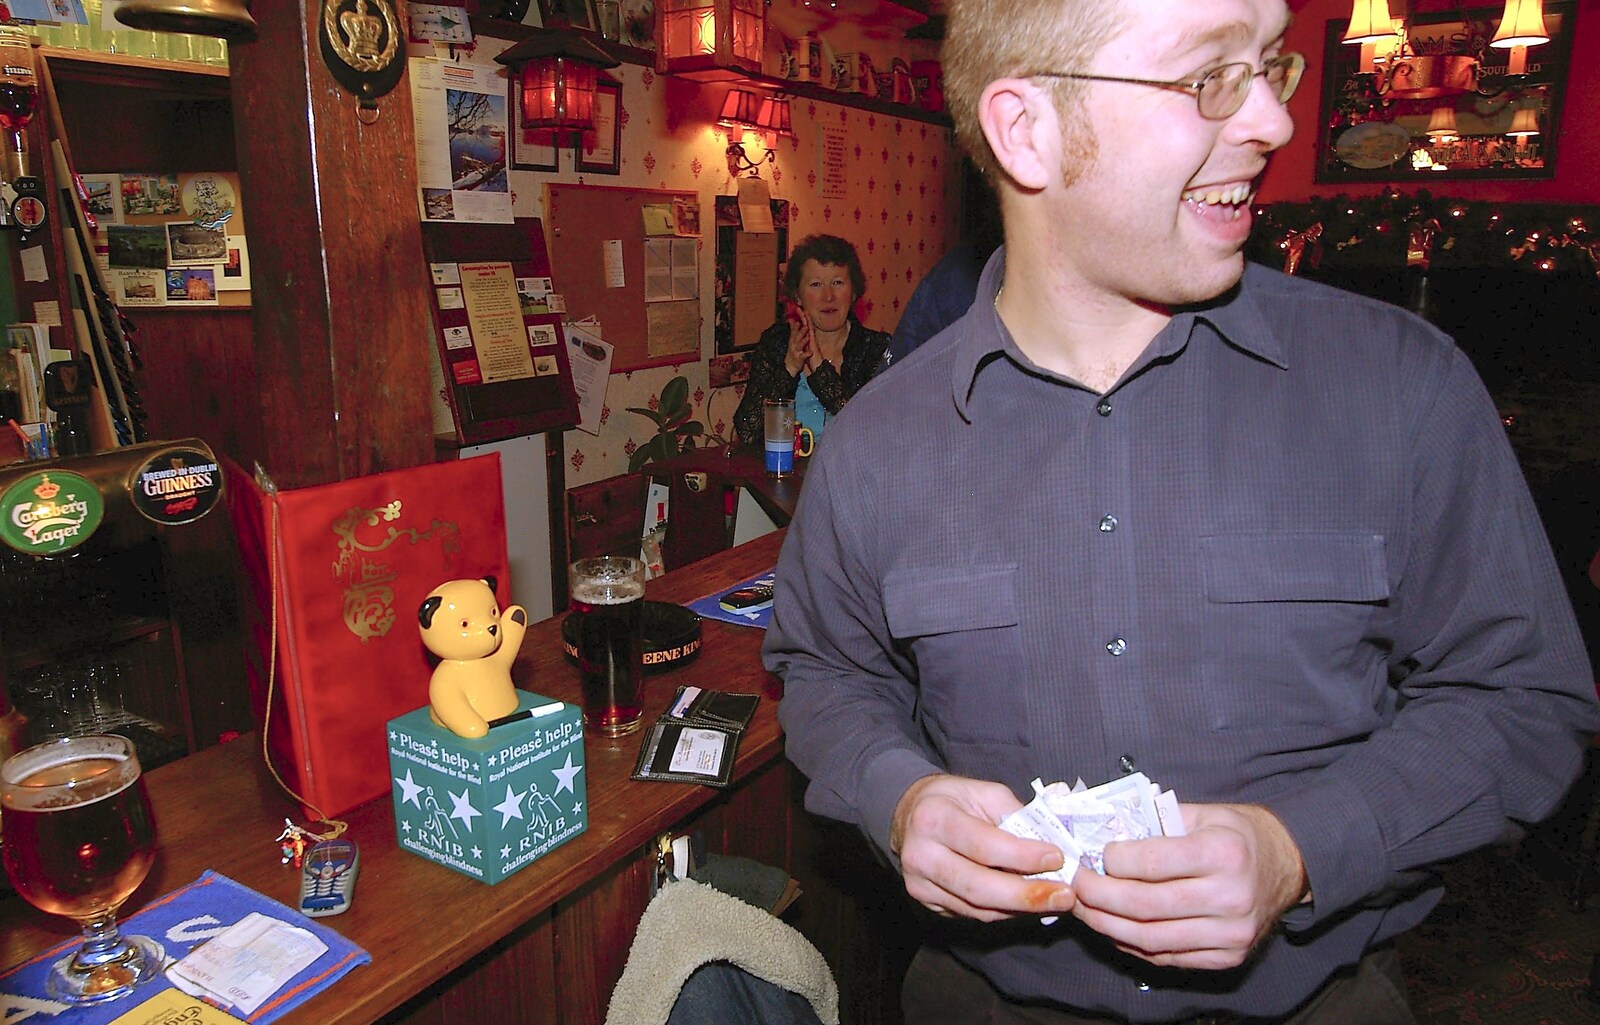 Marc's got a wad of cash from New Year's Eve and Day, Thorndon and Thornham, Suffolk - 1st January 2006